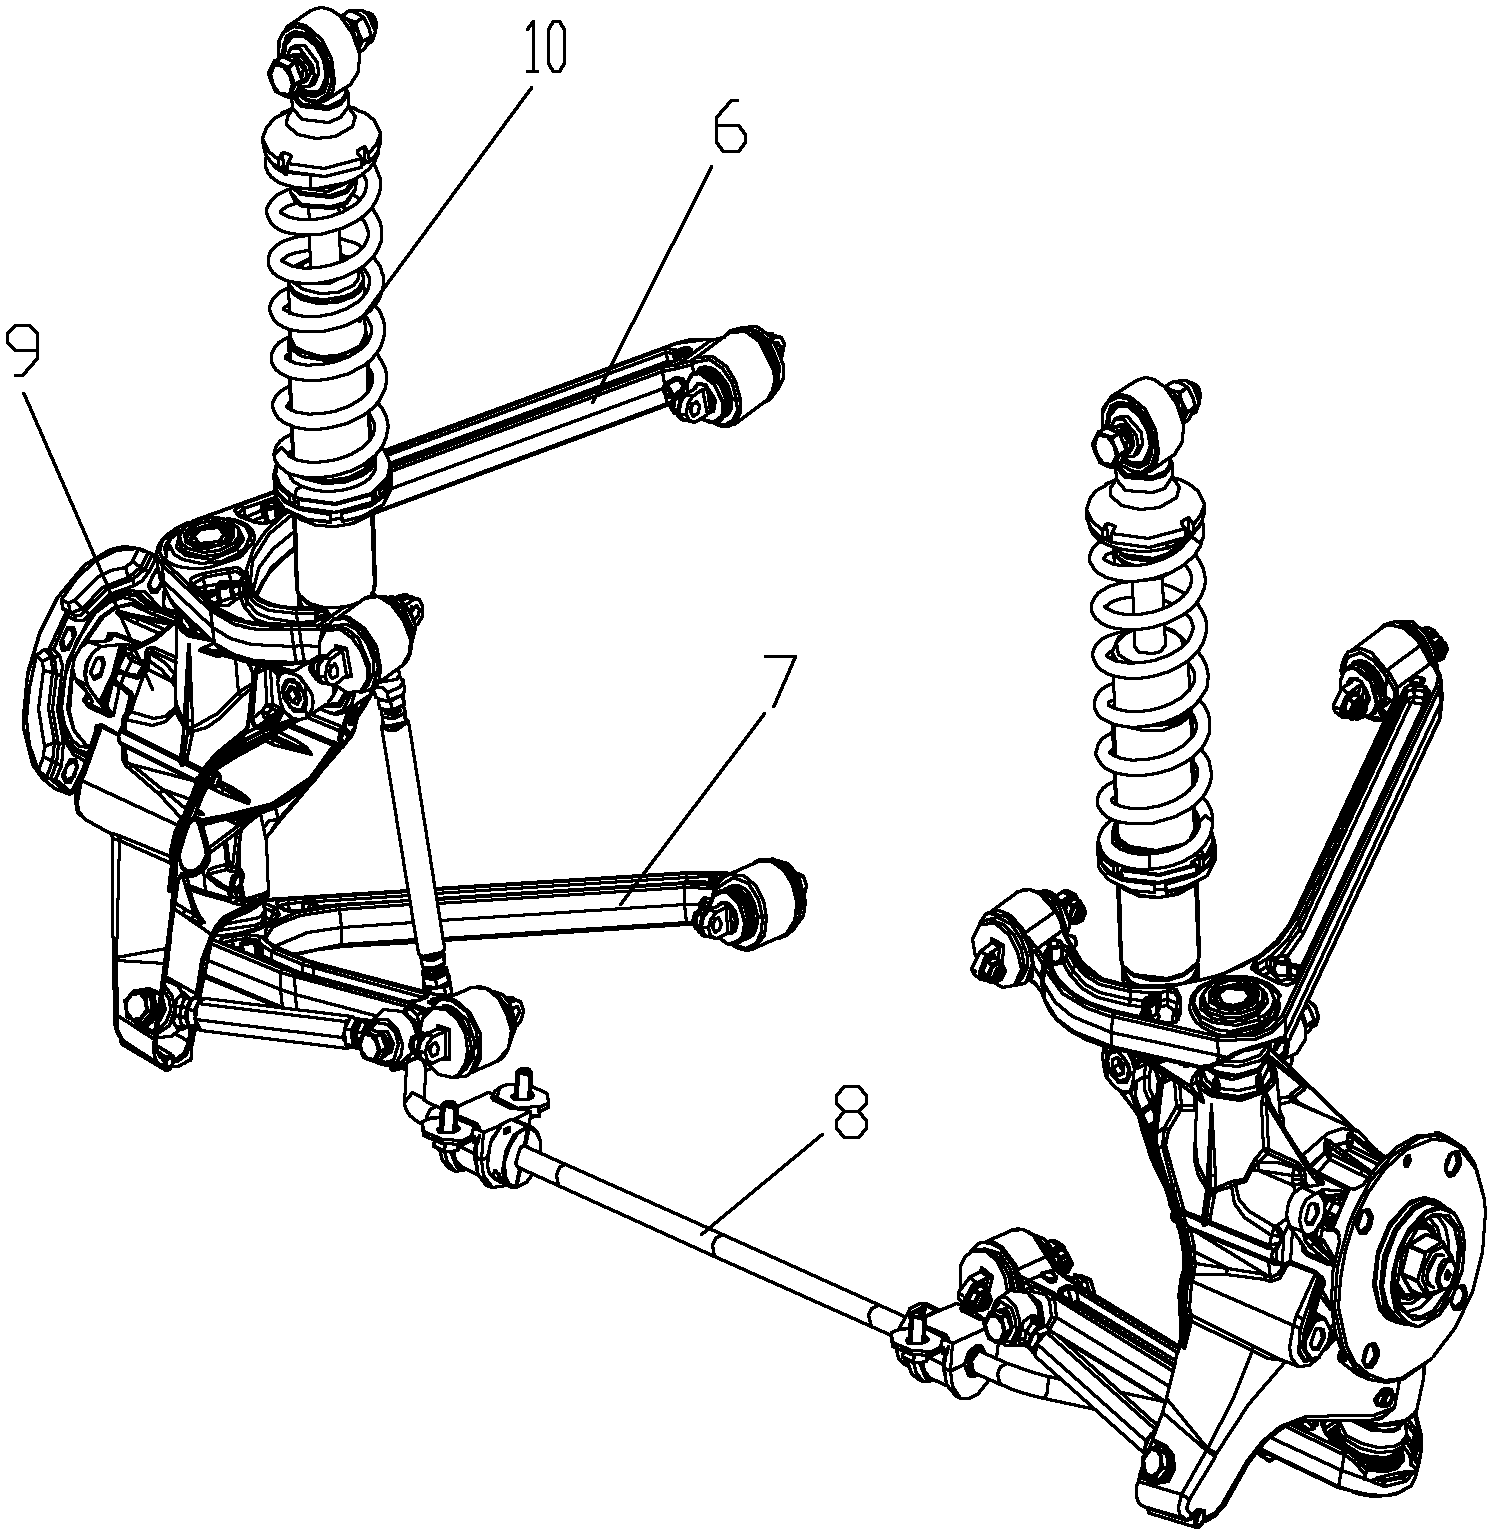 Vehicle double withbone arm type independent suspension system